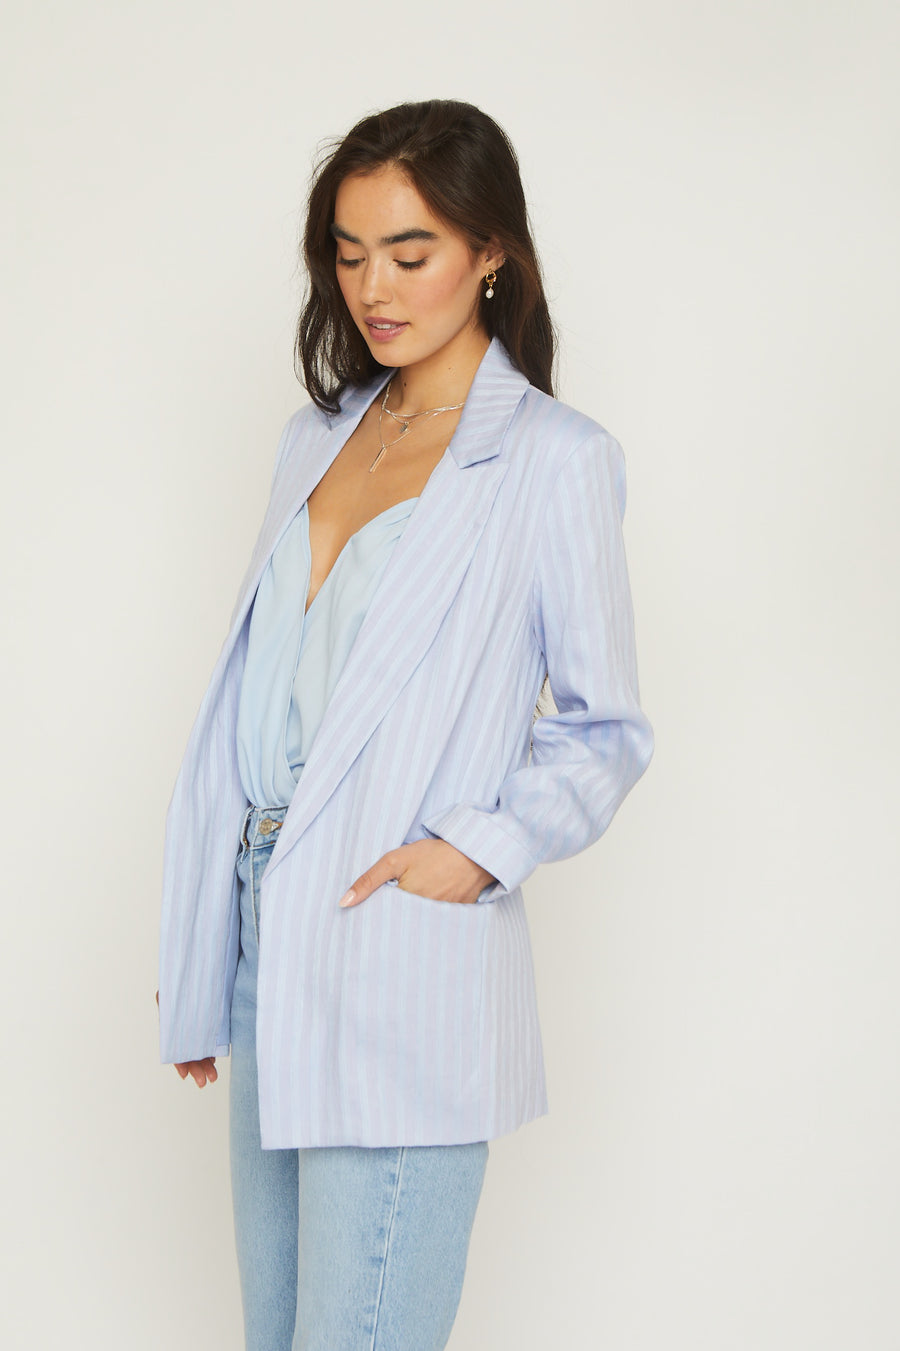 No Srcipt image - Images of 4 of 7 Madison jacket, oversized fit, linen blend , lustrous, sheen fabric, front pocket, open front, cuffed sleeve, light blue color